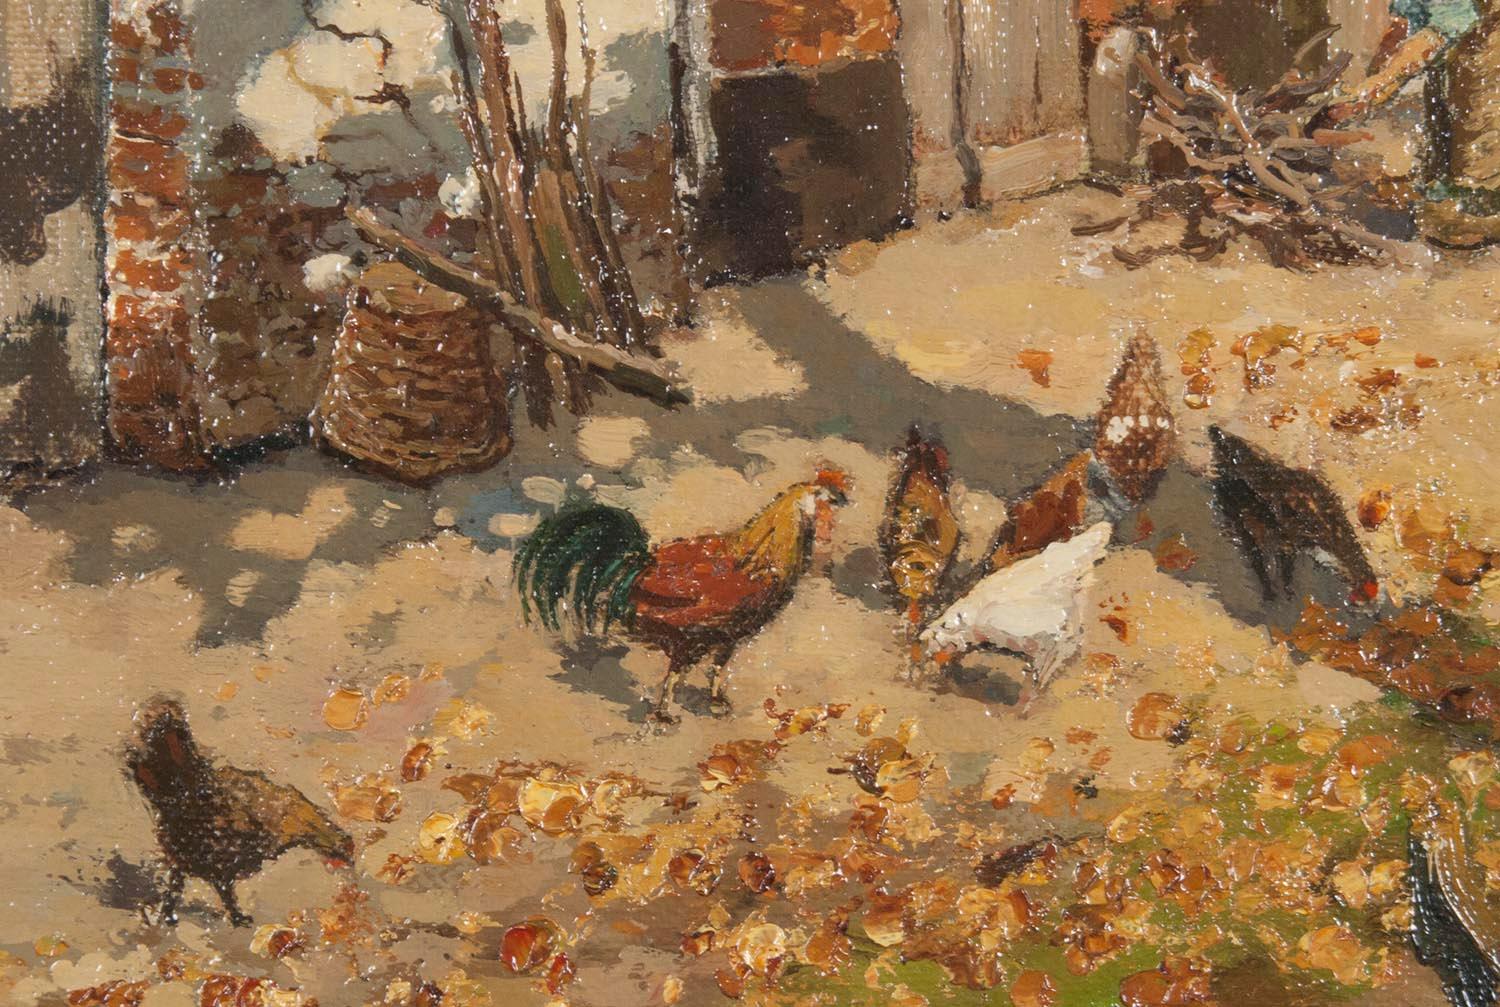 Early 20th Century Oil Painting of a Farm with Chickens in The Yard 1